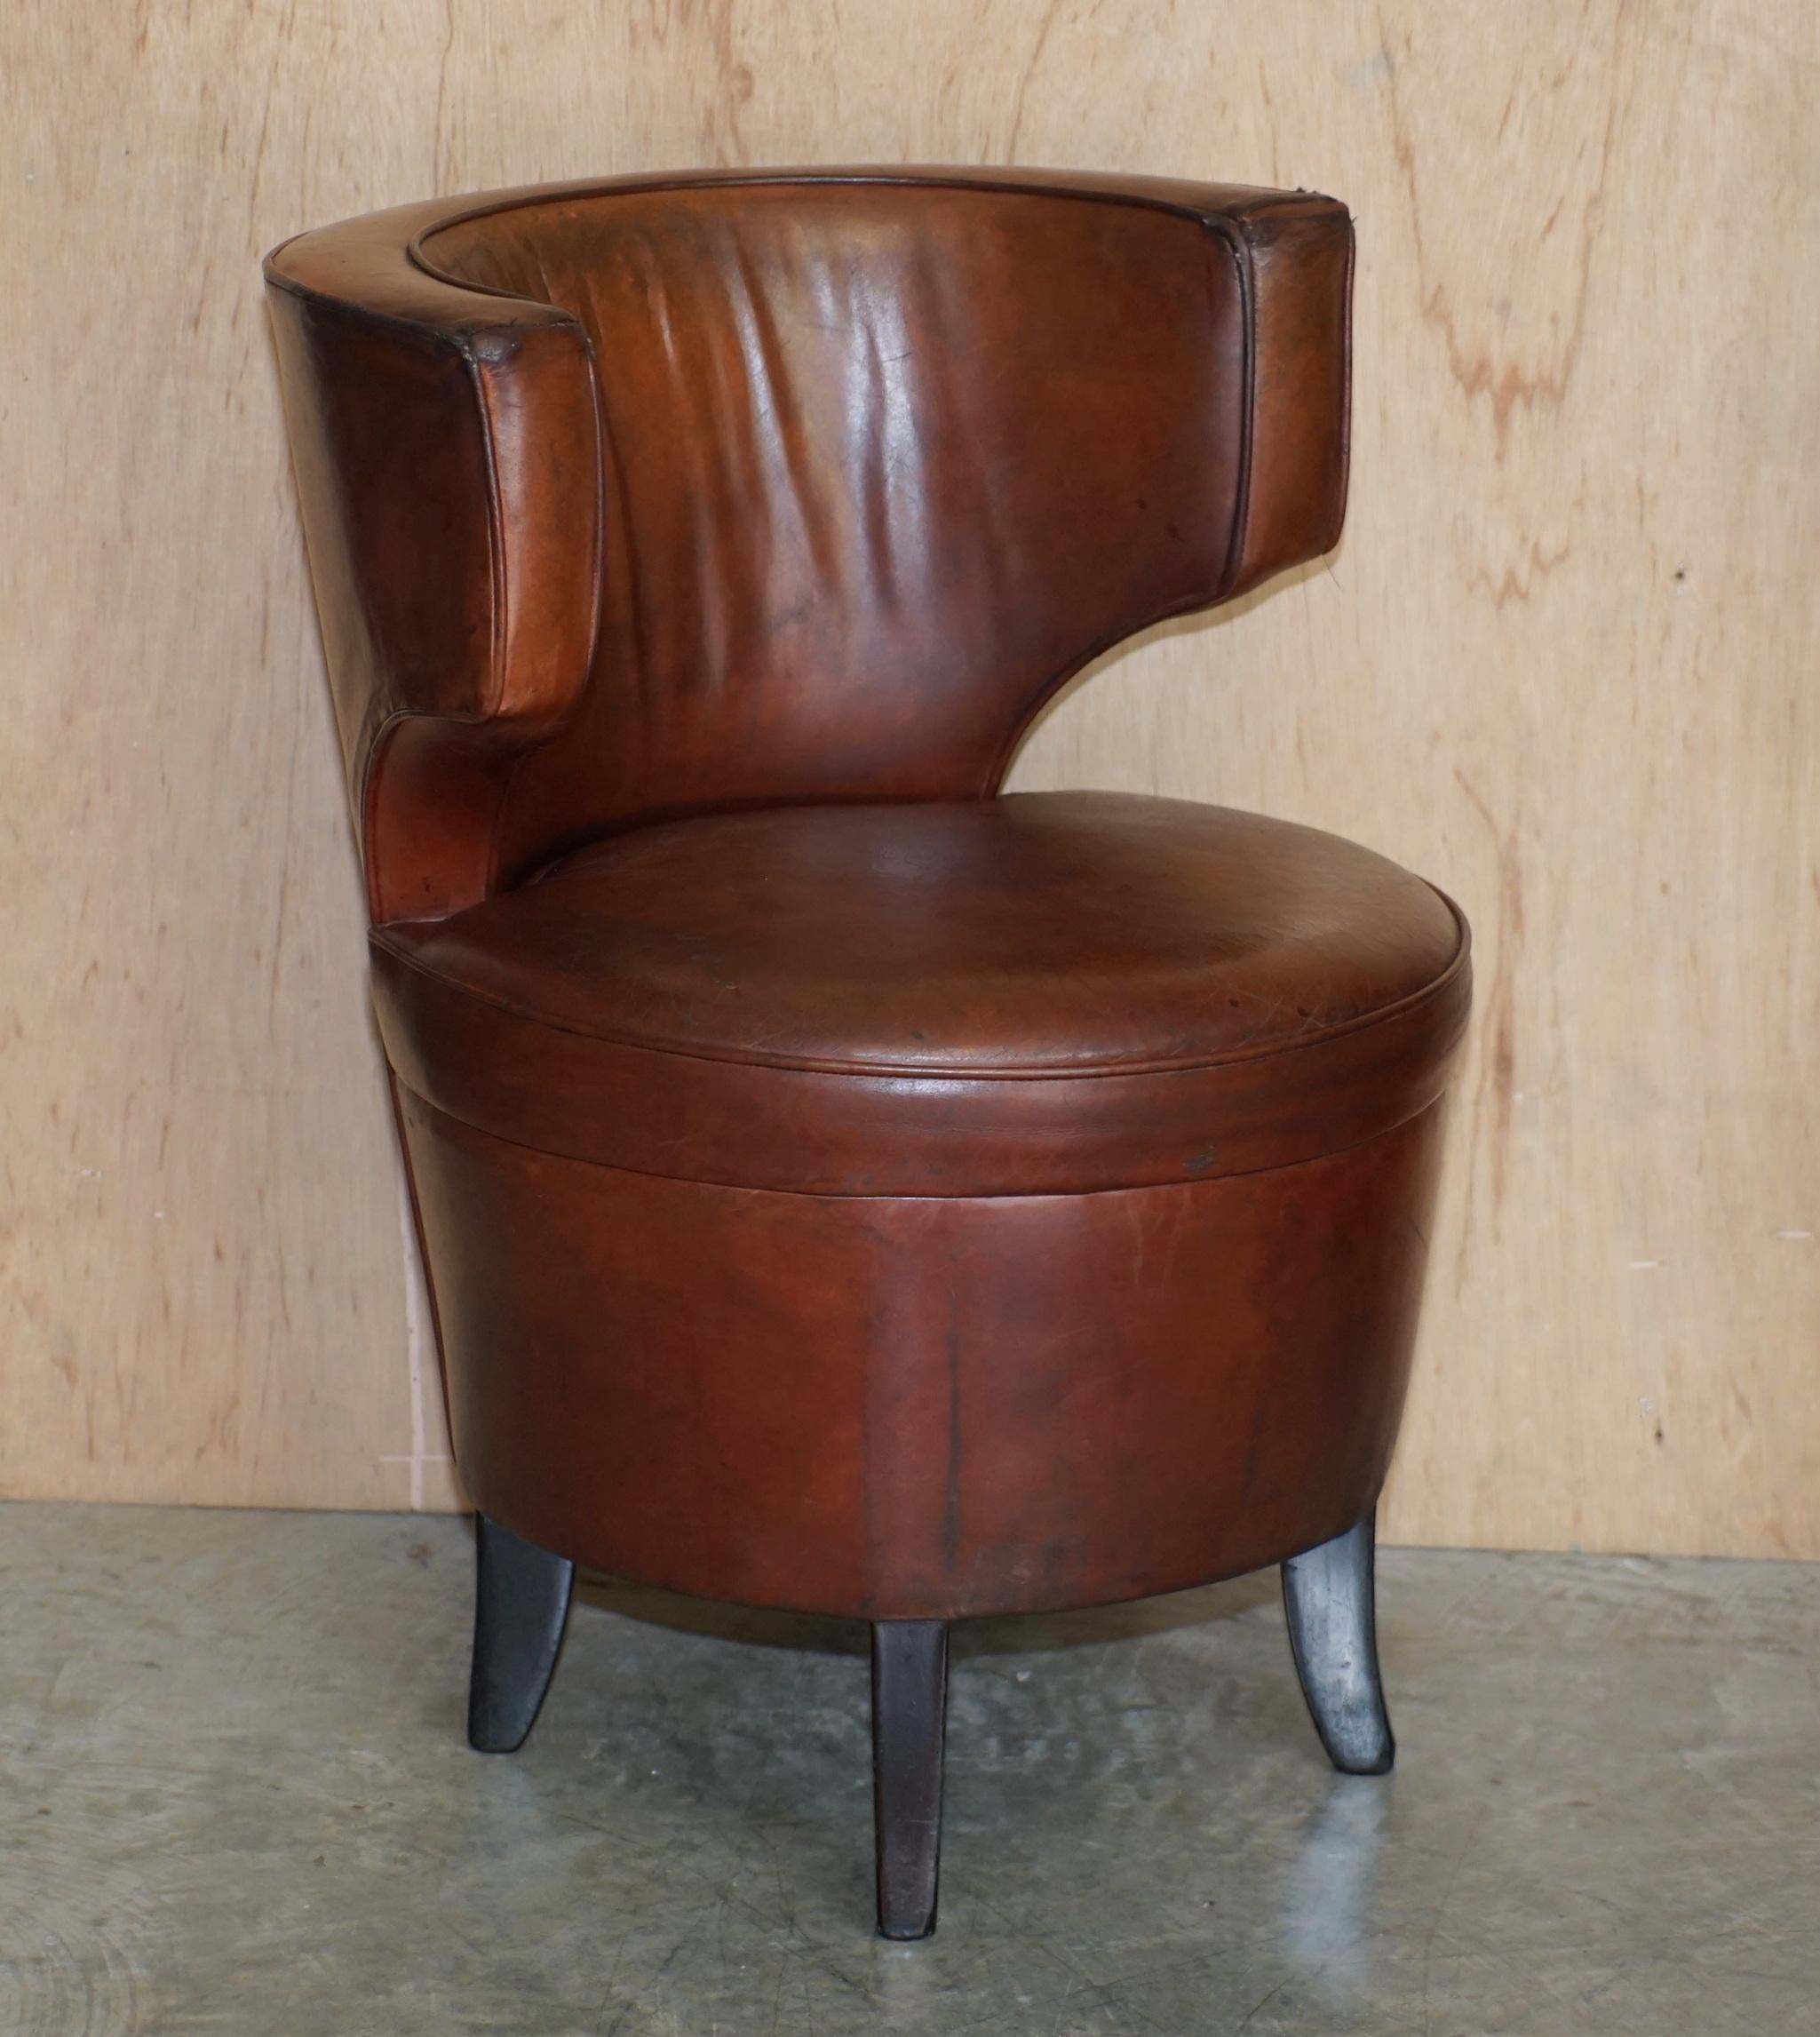 We are delighted to offer this suite of six age brown leather tub armchairs which need some restoration 

These are nicely made comfortable occasional armchairs, they can be used as dining chairs or for bar / café use. Each chair needs a little